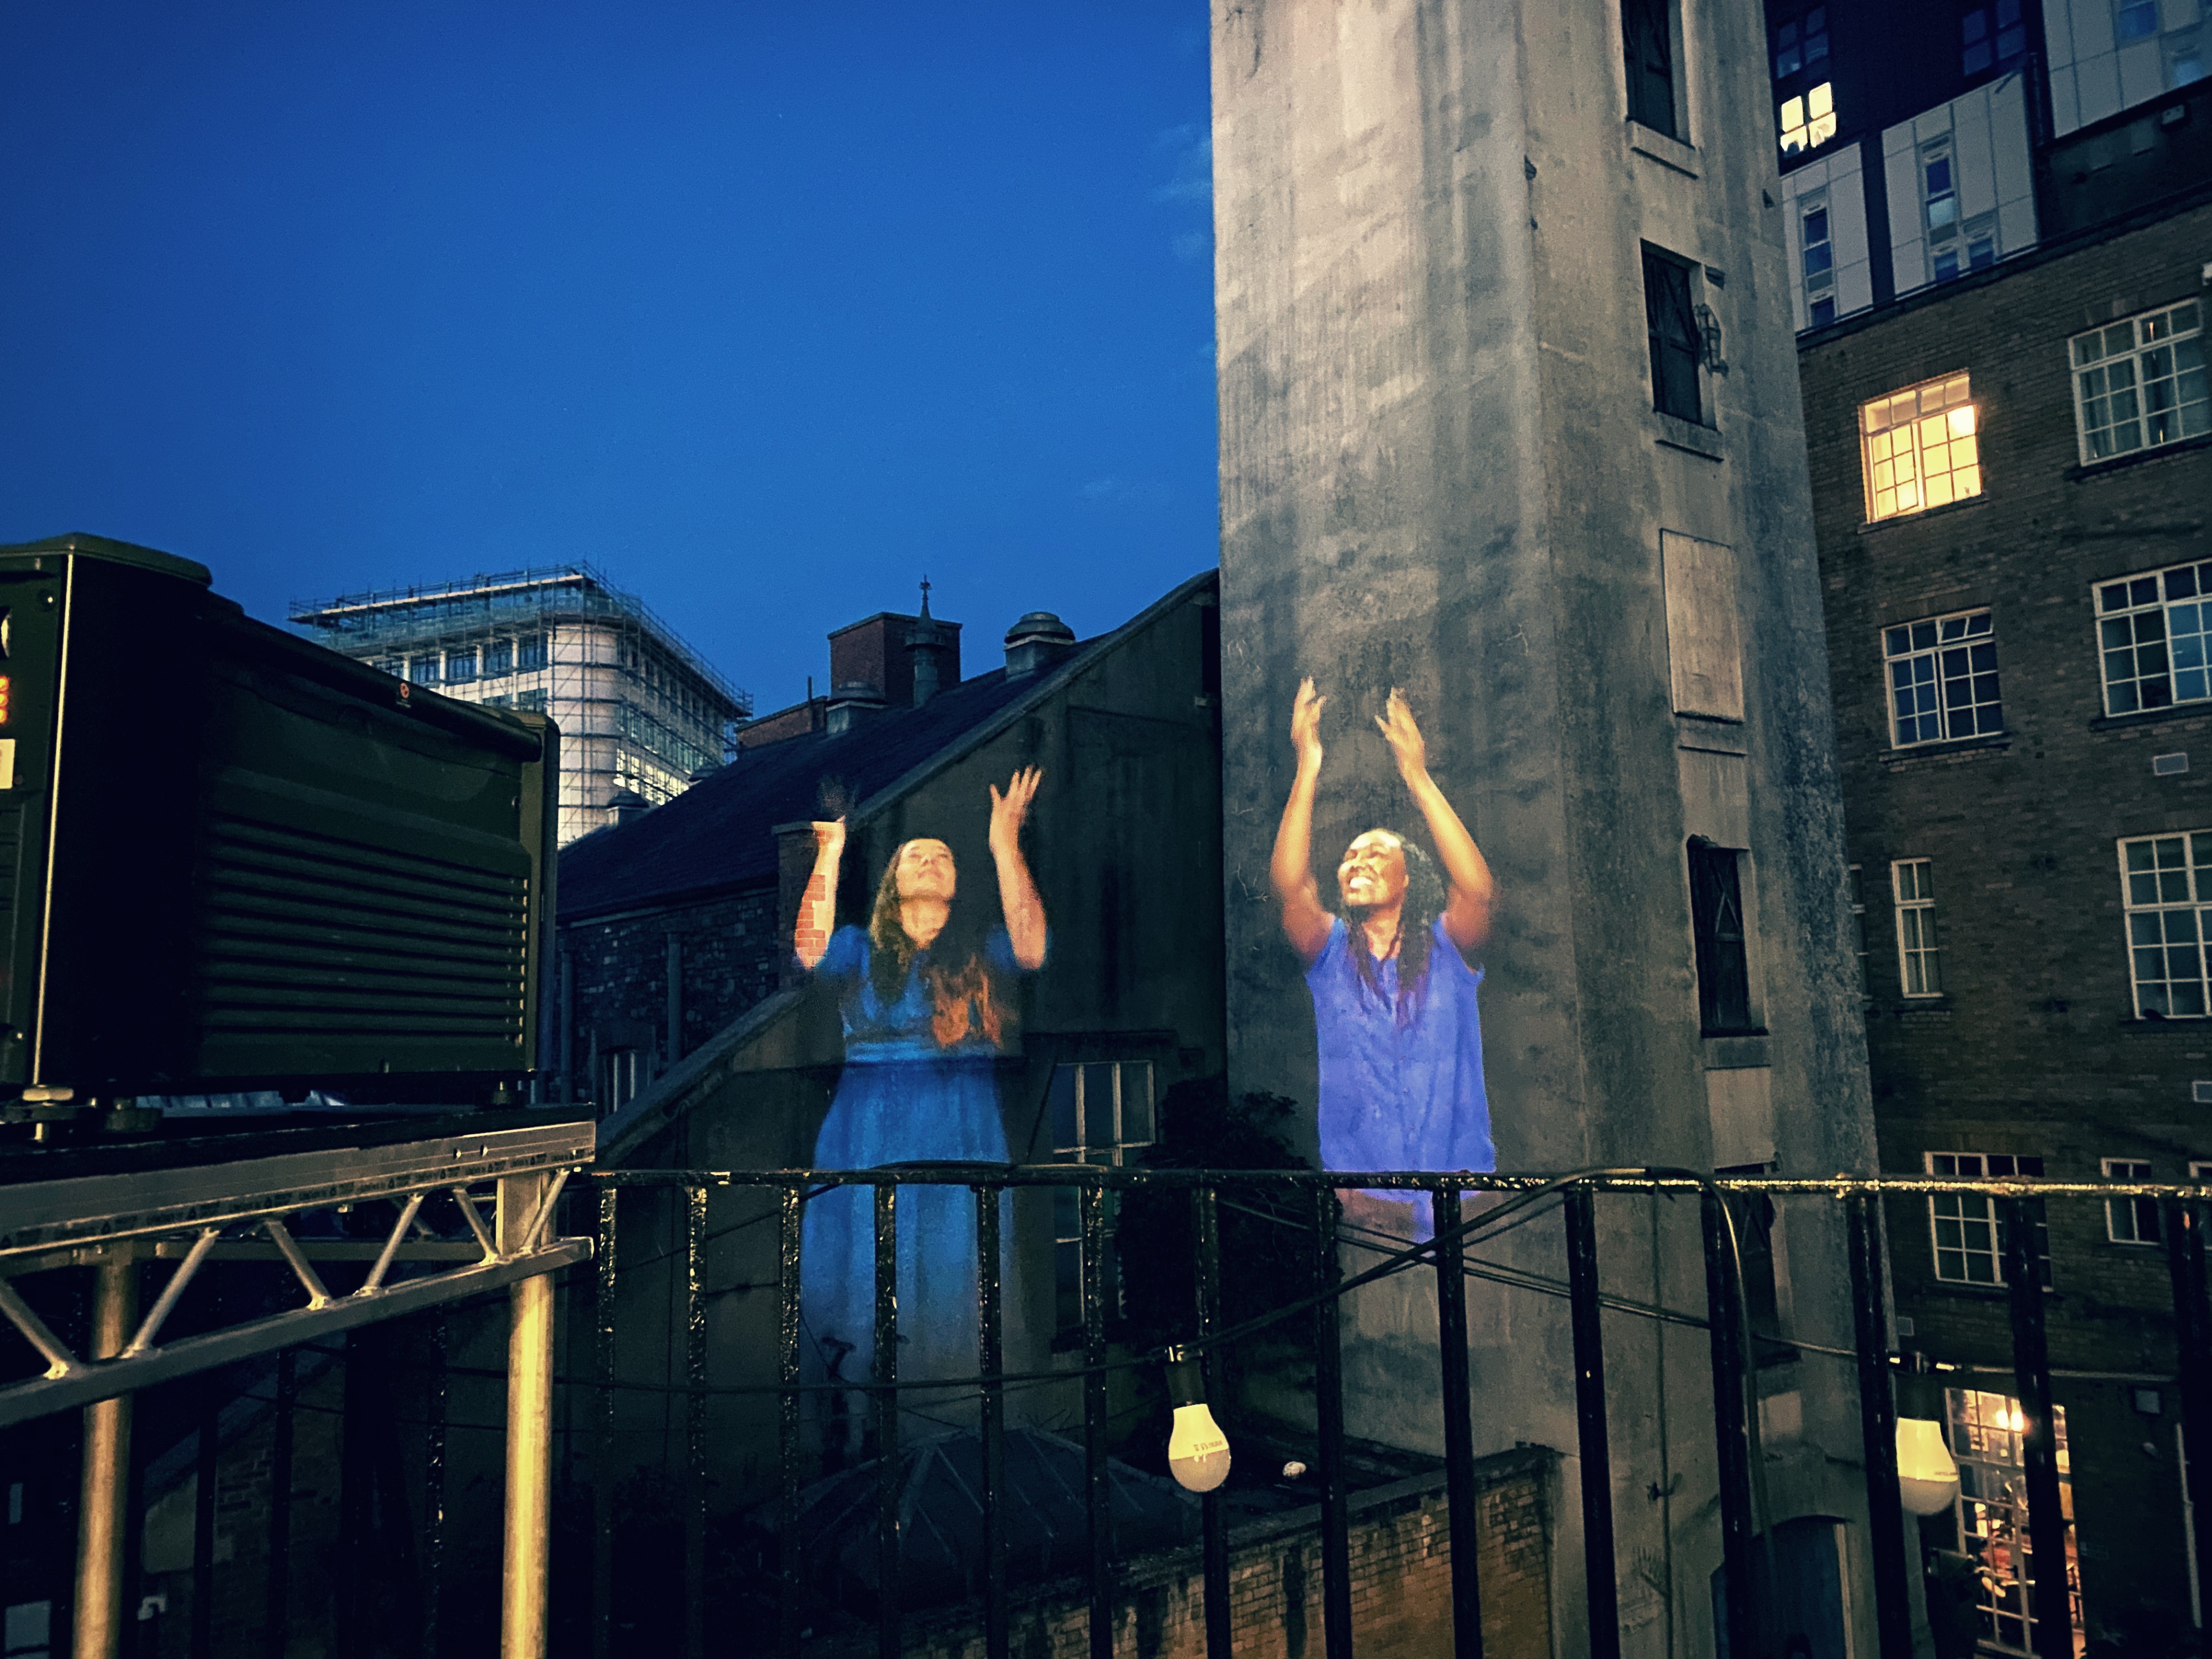 Images of two women projected onto an urban background